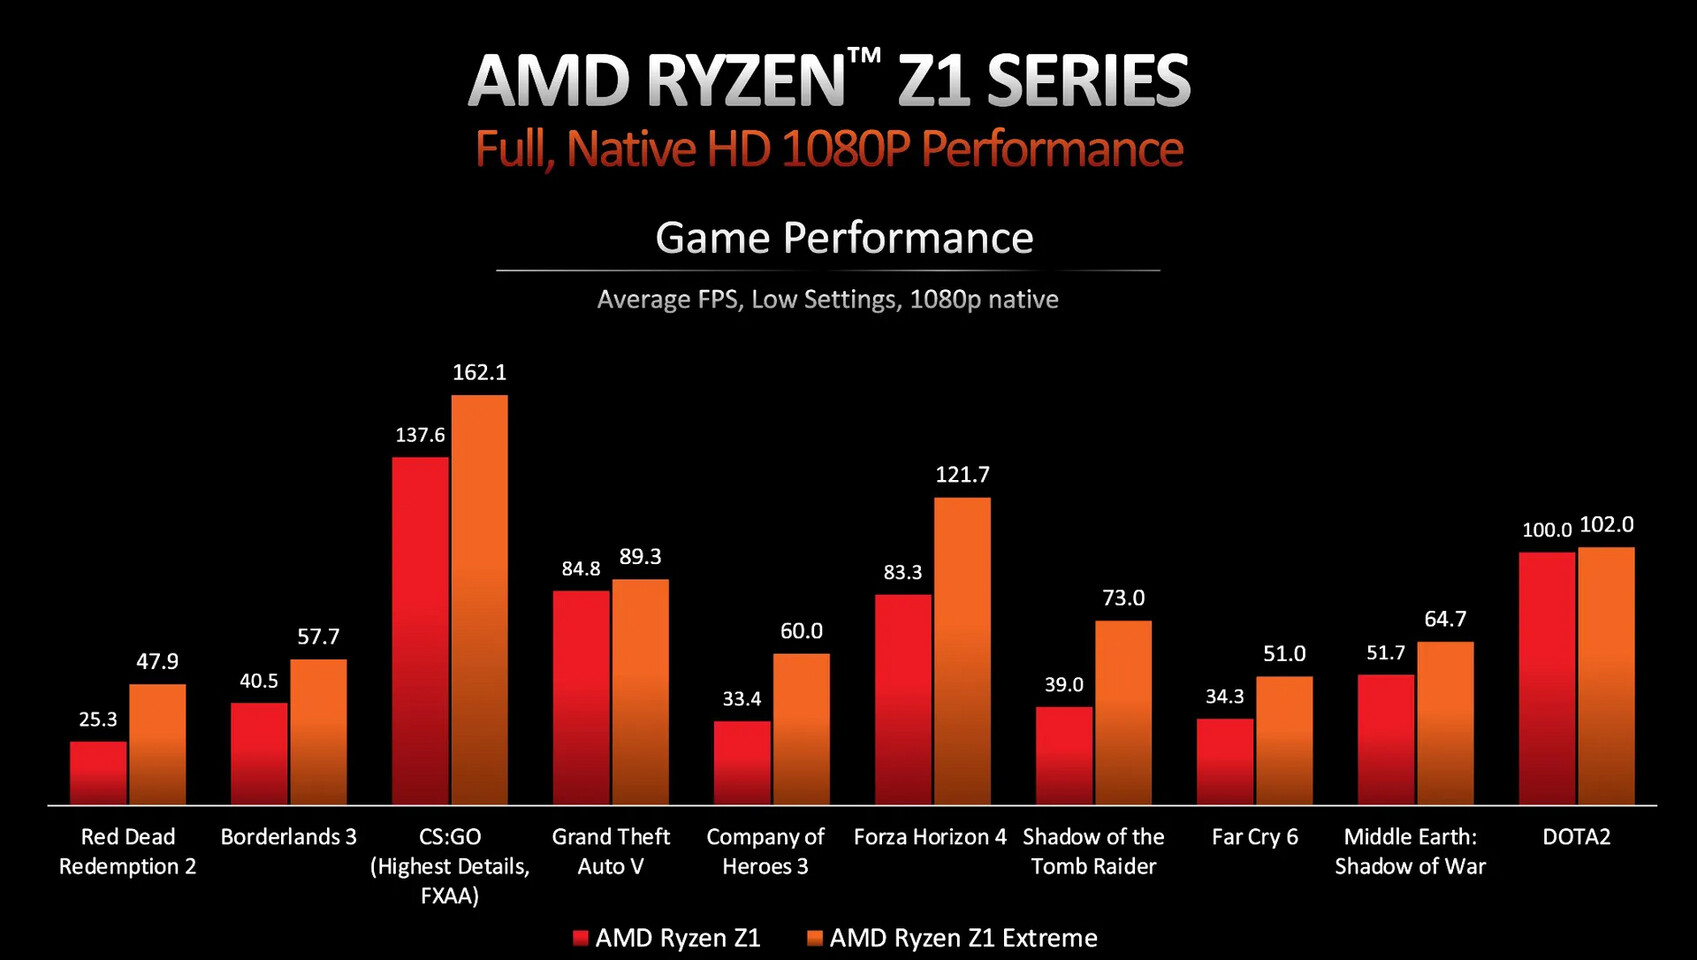 ASUS ROG Ally Gaming Benchmarks Show AMD Z1 Extreme 42% Faster at 1080p &  34% Faster at 720p Versus Standard Z1 APU